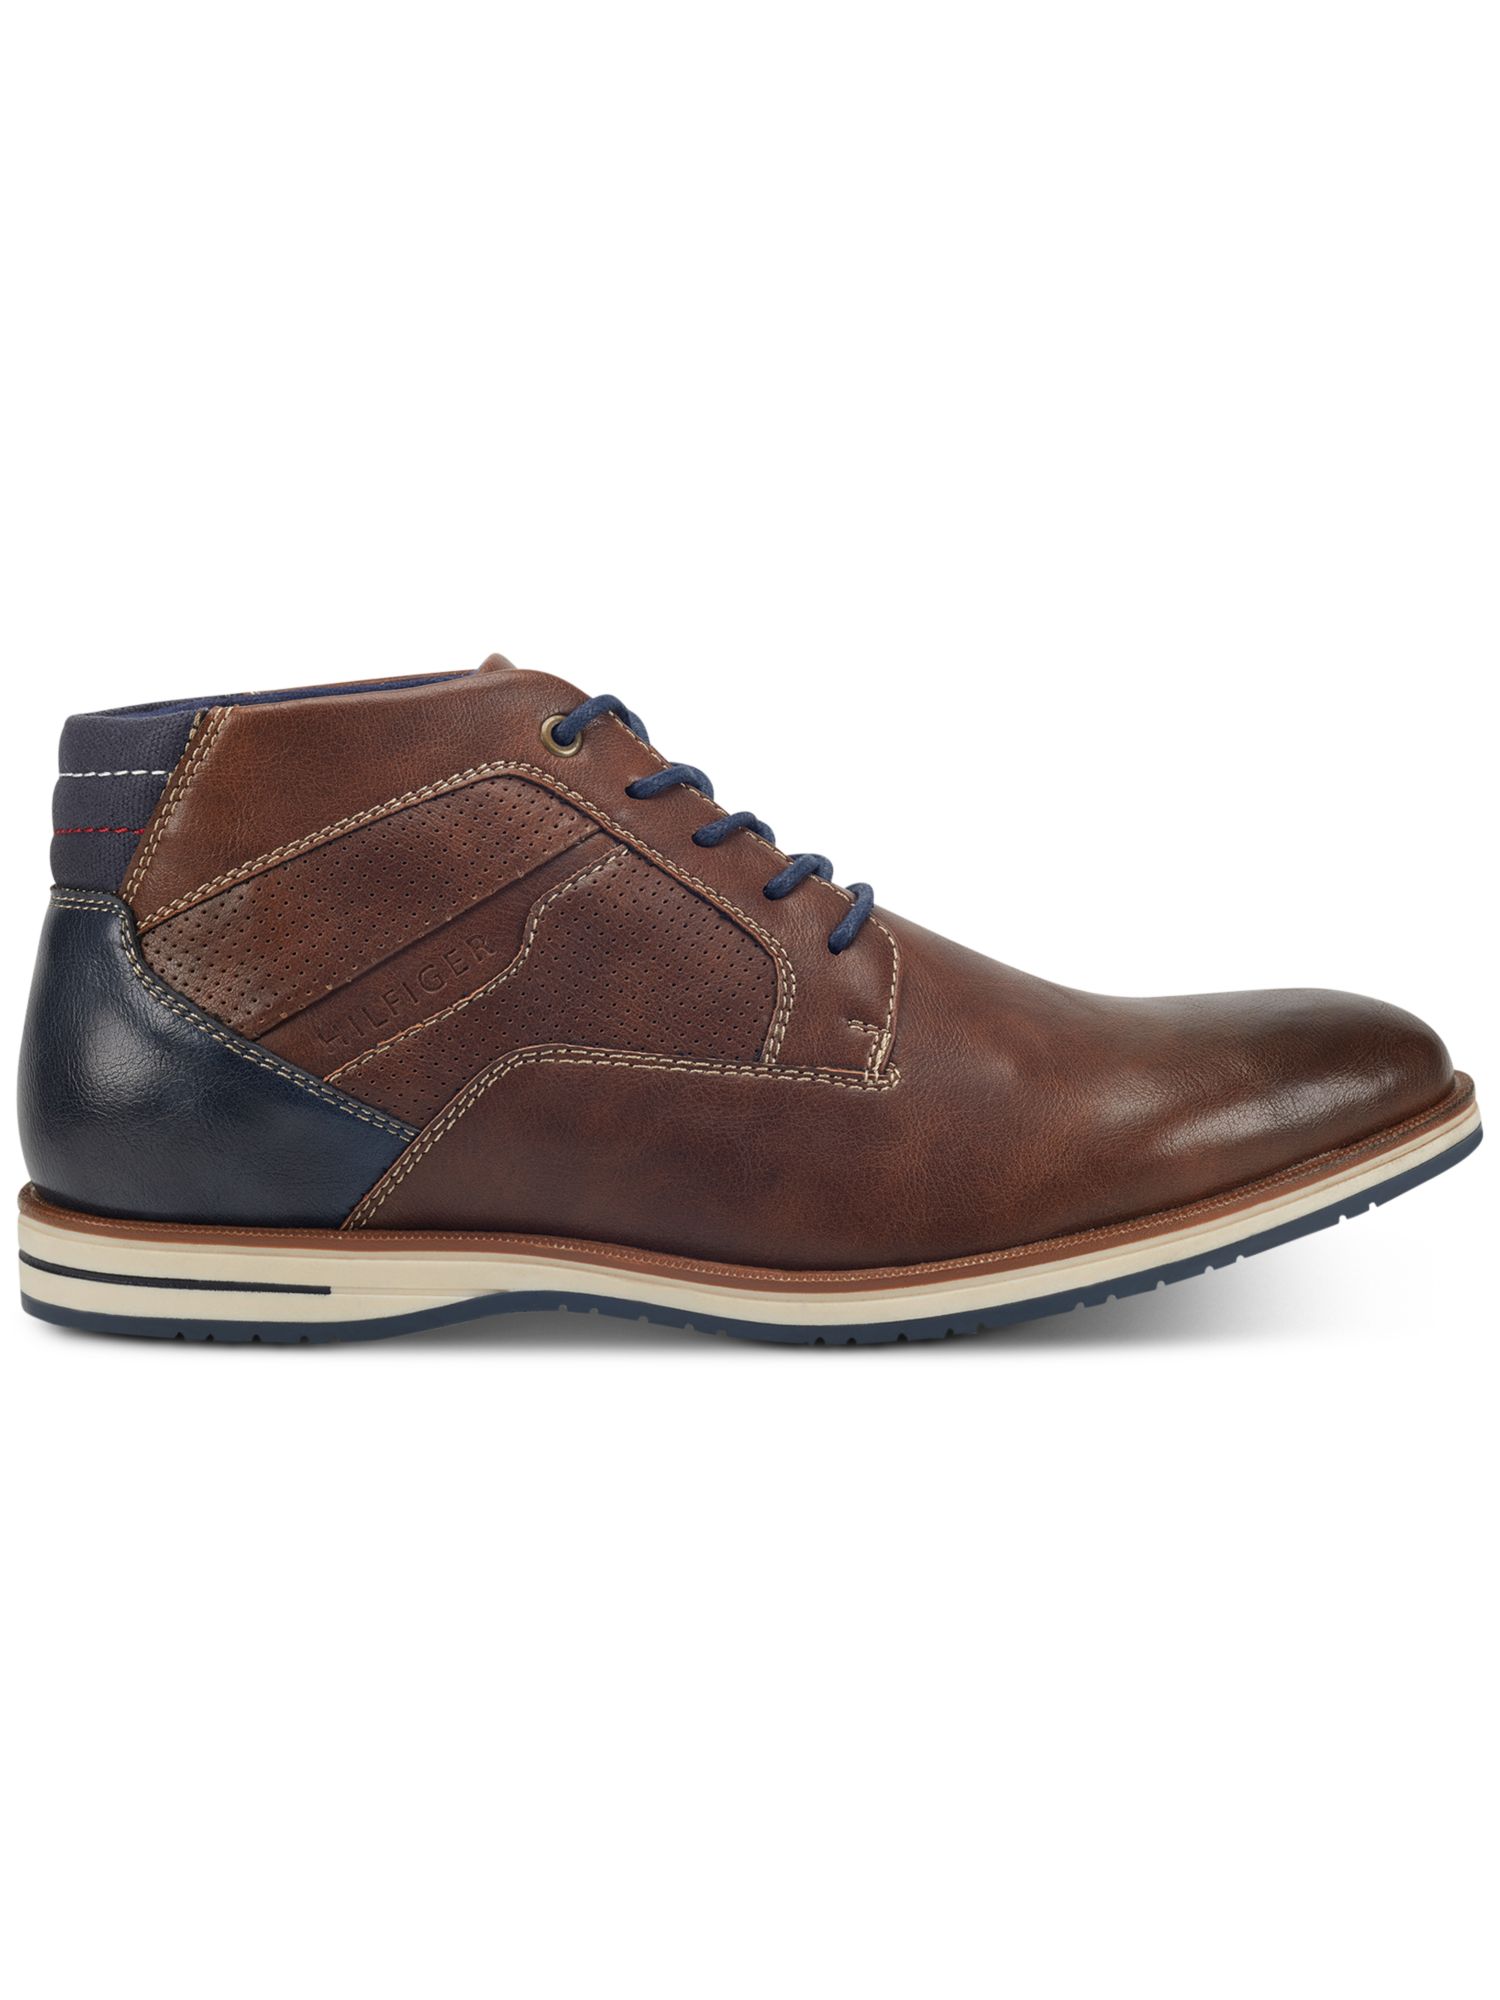 TOMMY HILFIGER Mens Brown Cushioned Comfort Ulan Round Toe Platform Lace-Up Chukka Boots 11.5 M - image 2 of 4